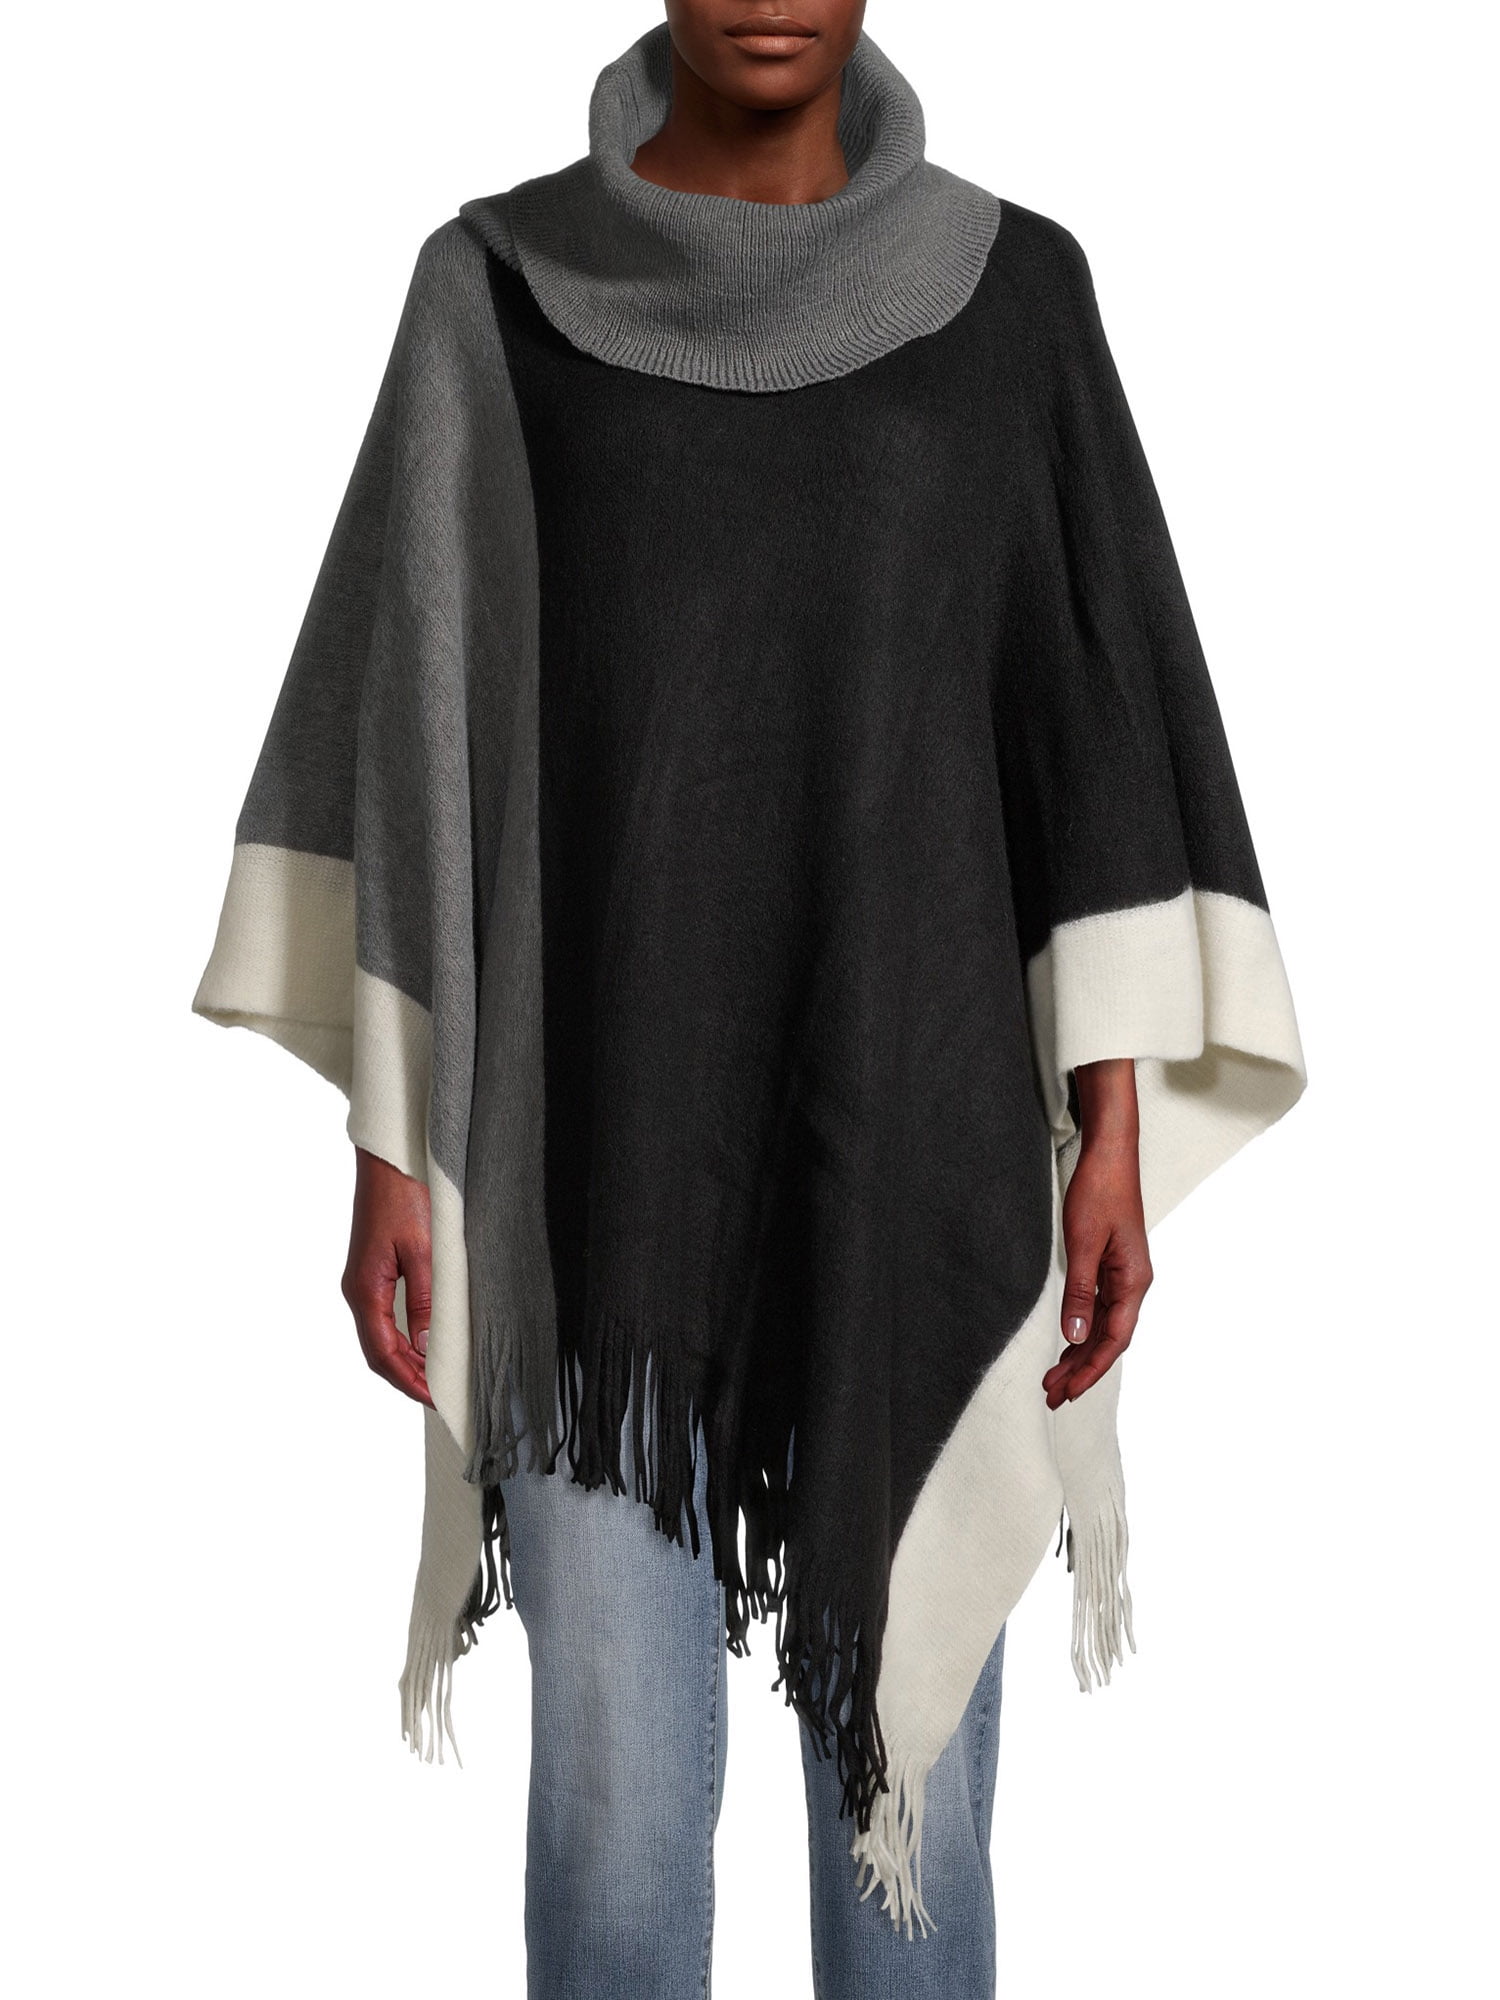 Cloak Poncho Wrap with Cowl Neck